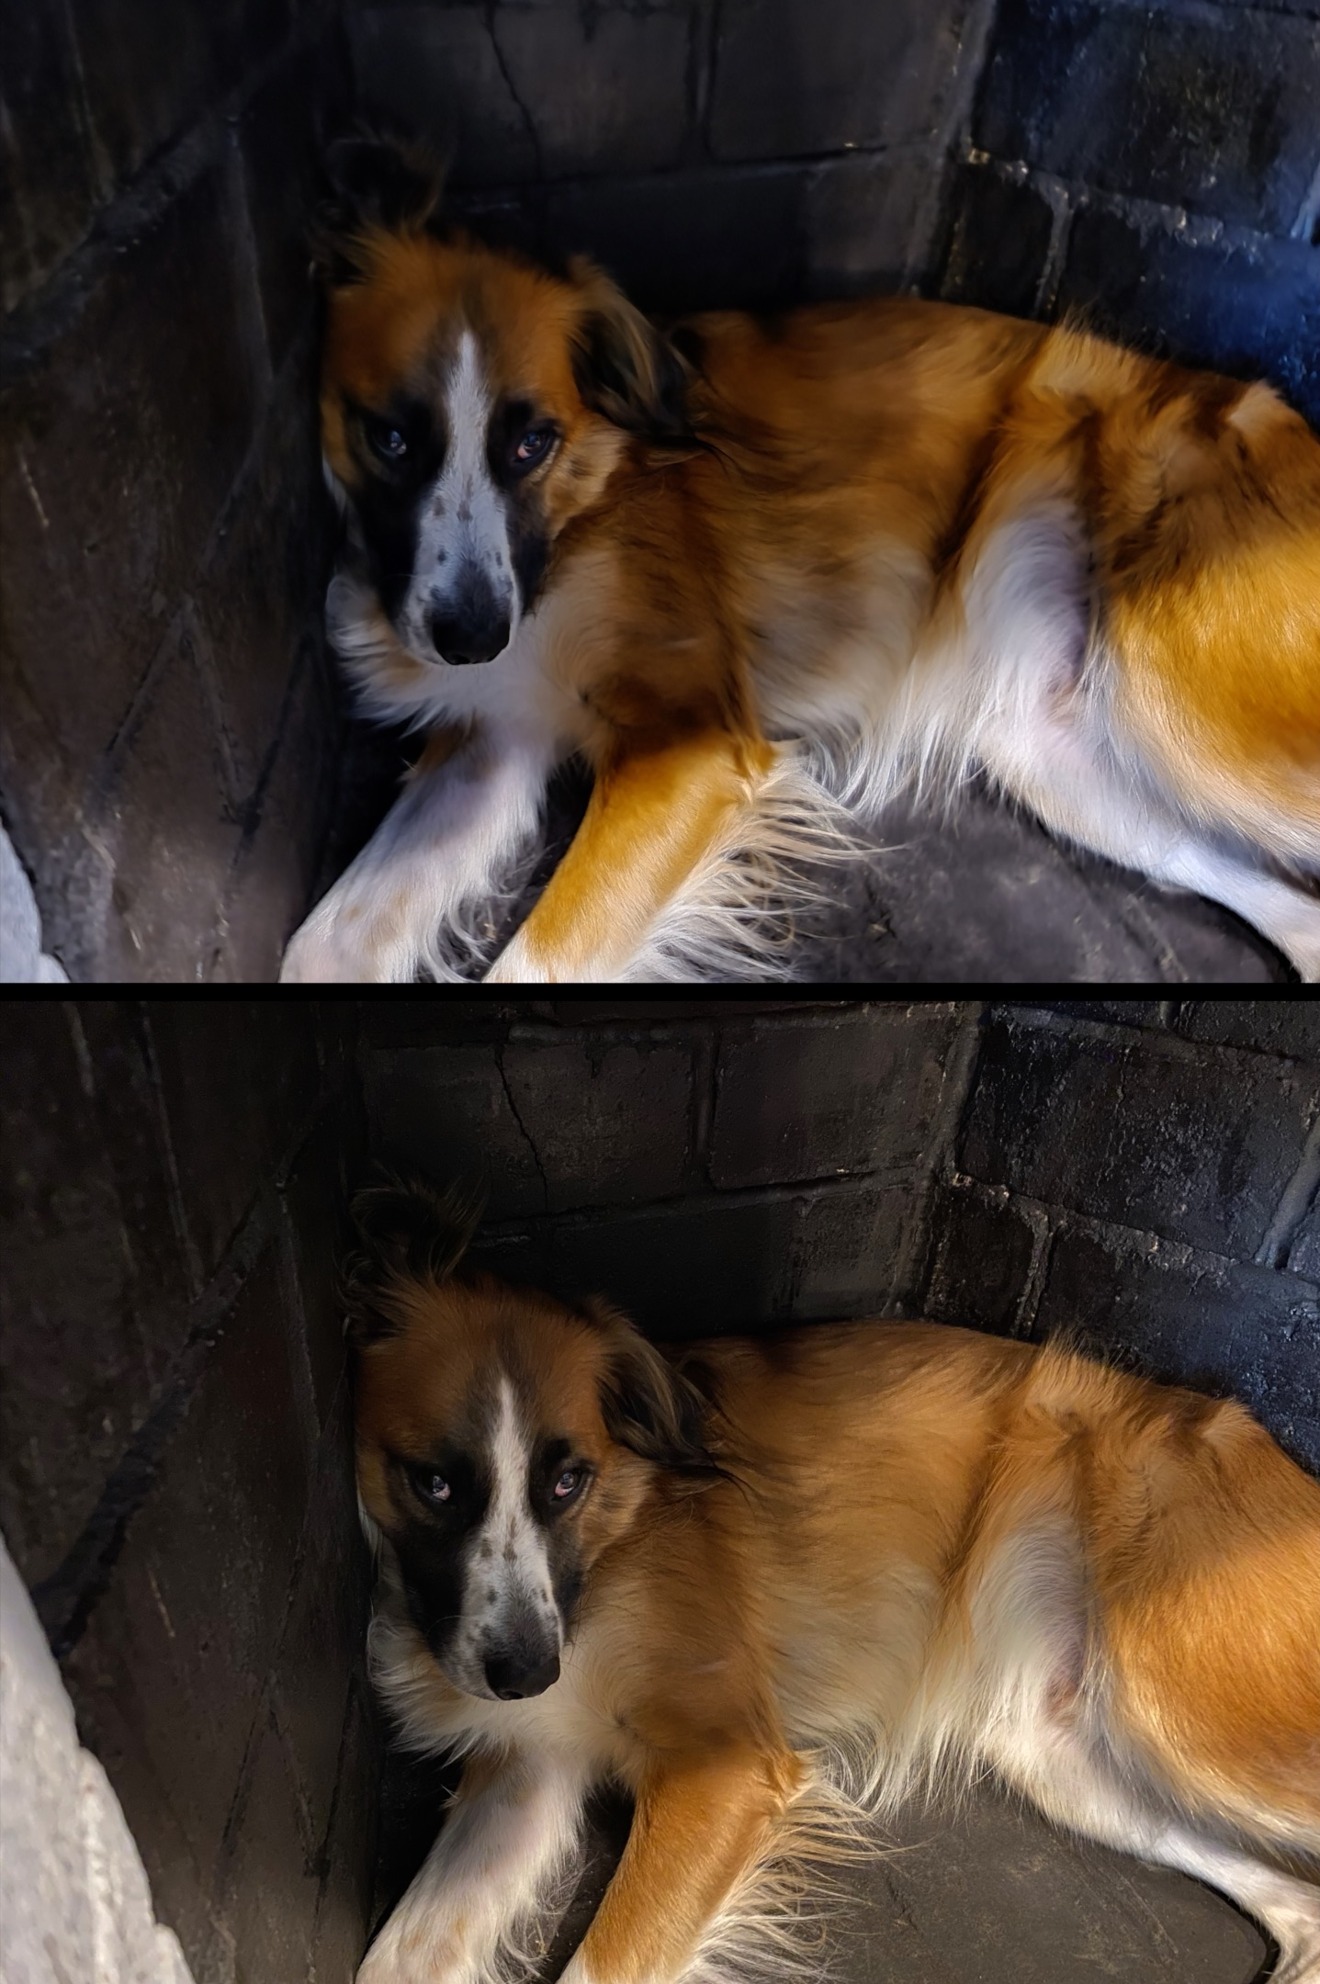 A handheld night shot on the Samsung Galaxy S20 Ultra (top) versus the iPhone 11 Pro Max (bottom)